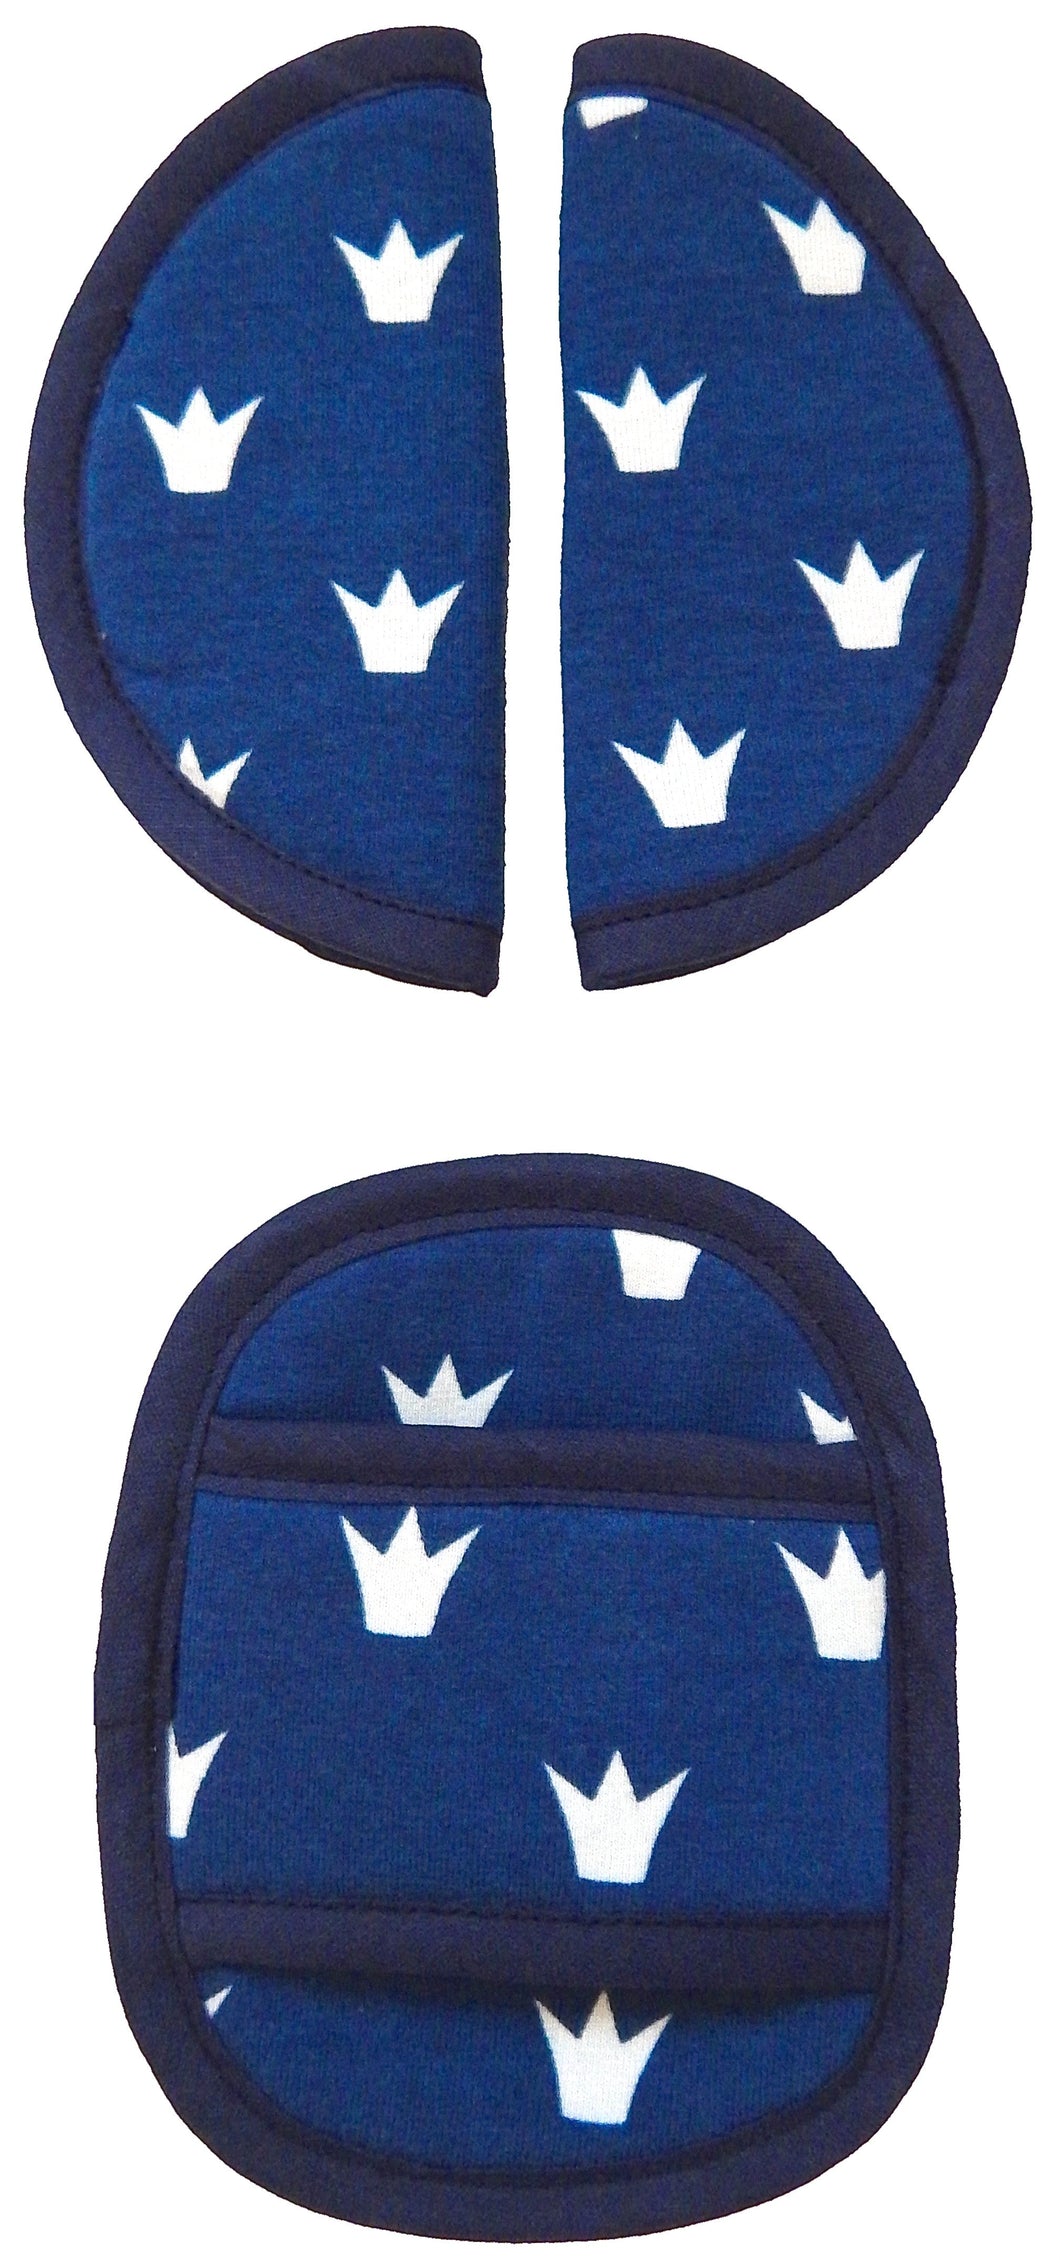 Maxi Cosi Seat Belt Pads - Blue with White Crowns